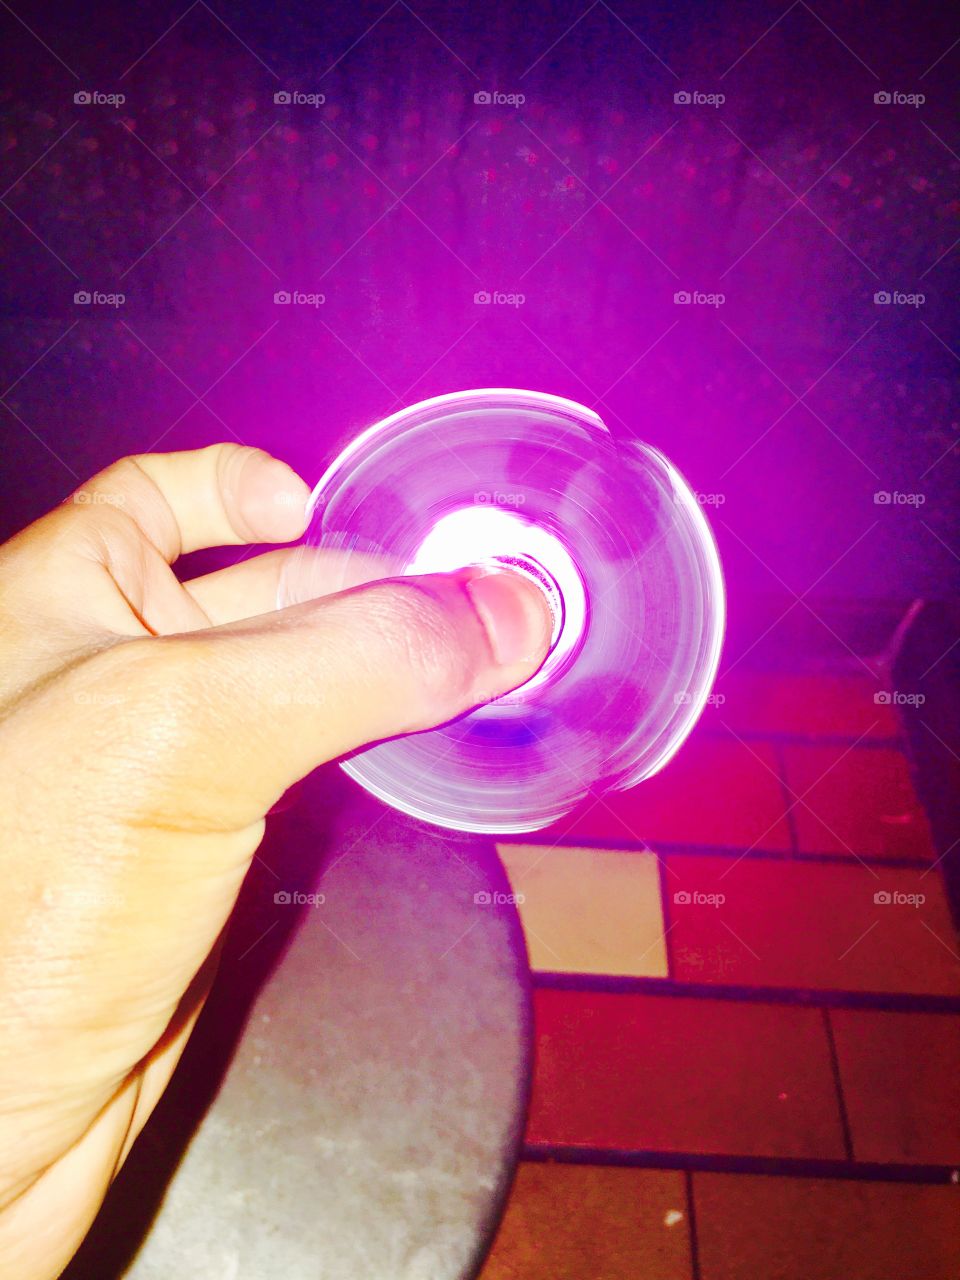 Playing with light 
Playing with a fidget spinner HQ
Fidget spinner 
Light reflection in motion 
Light focus on fidget spinner 
Spectrum of light and colours
